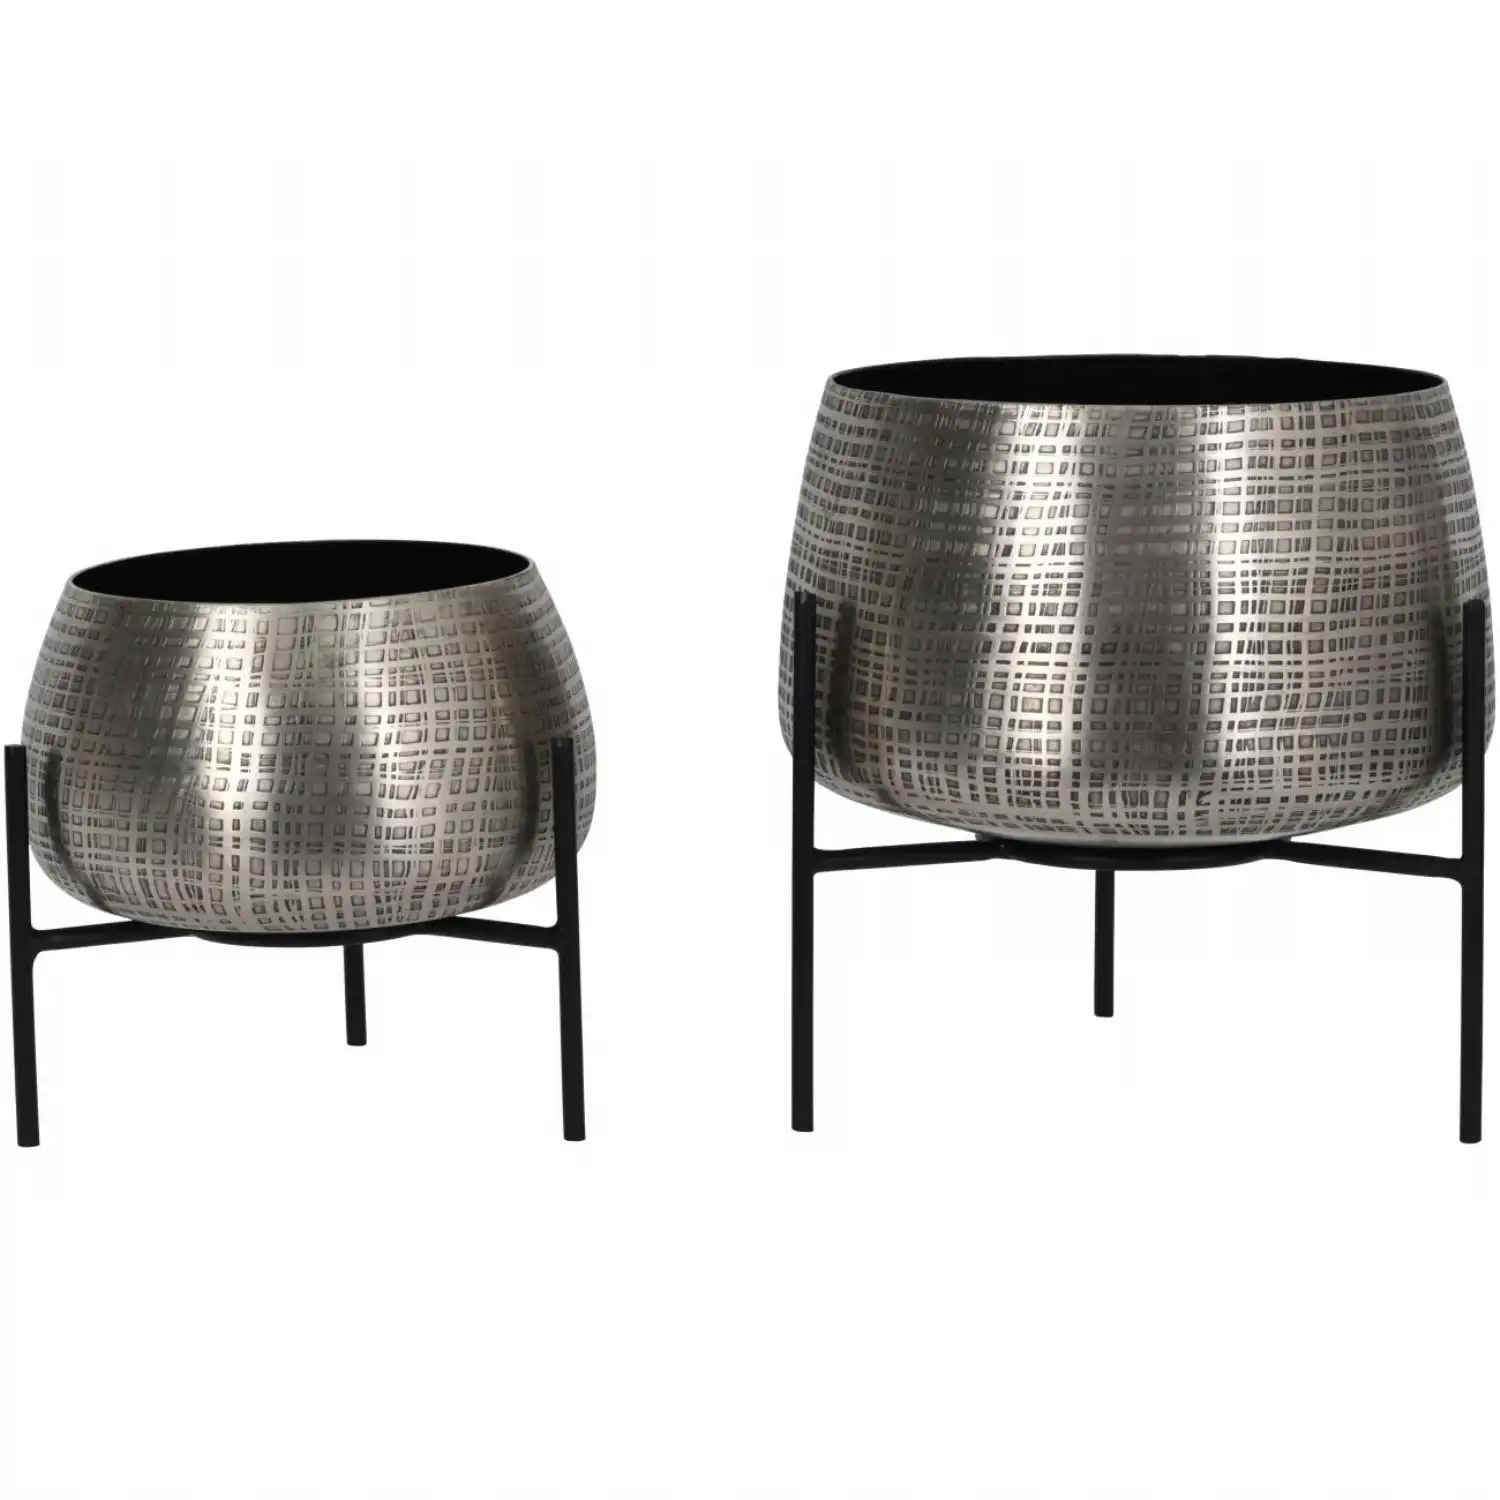 Tabletop Nickel Set of 2 Planters on Black Stands